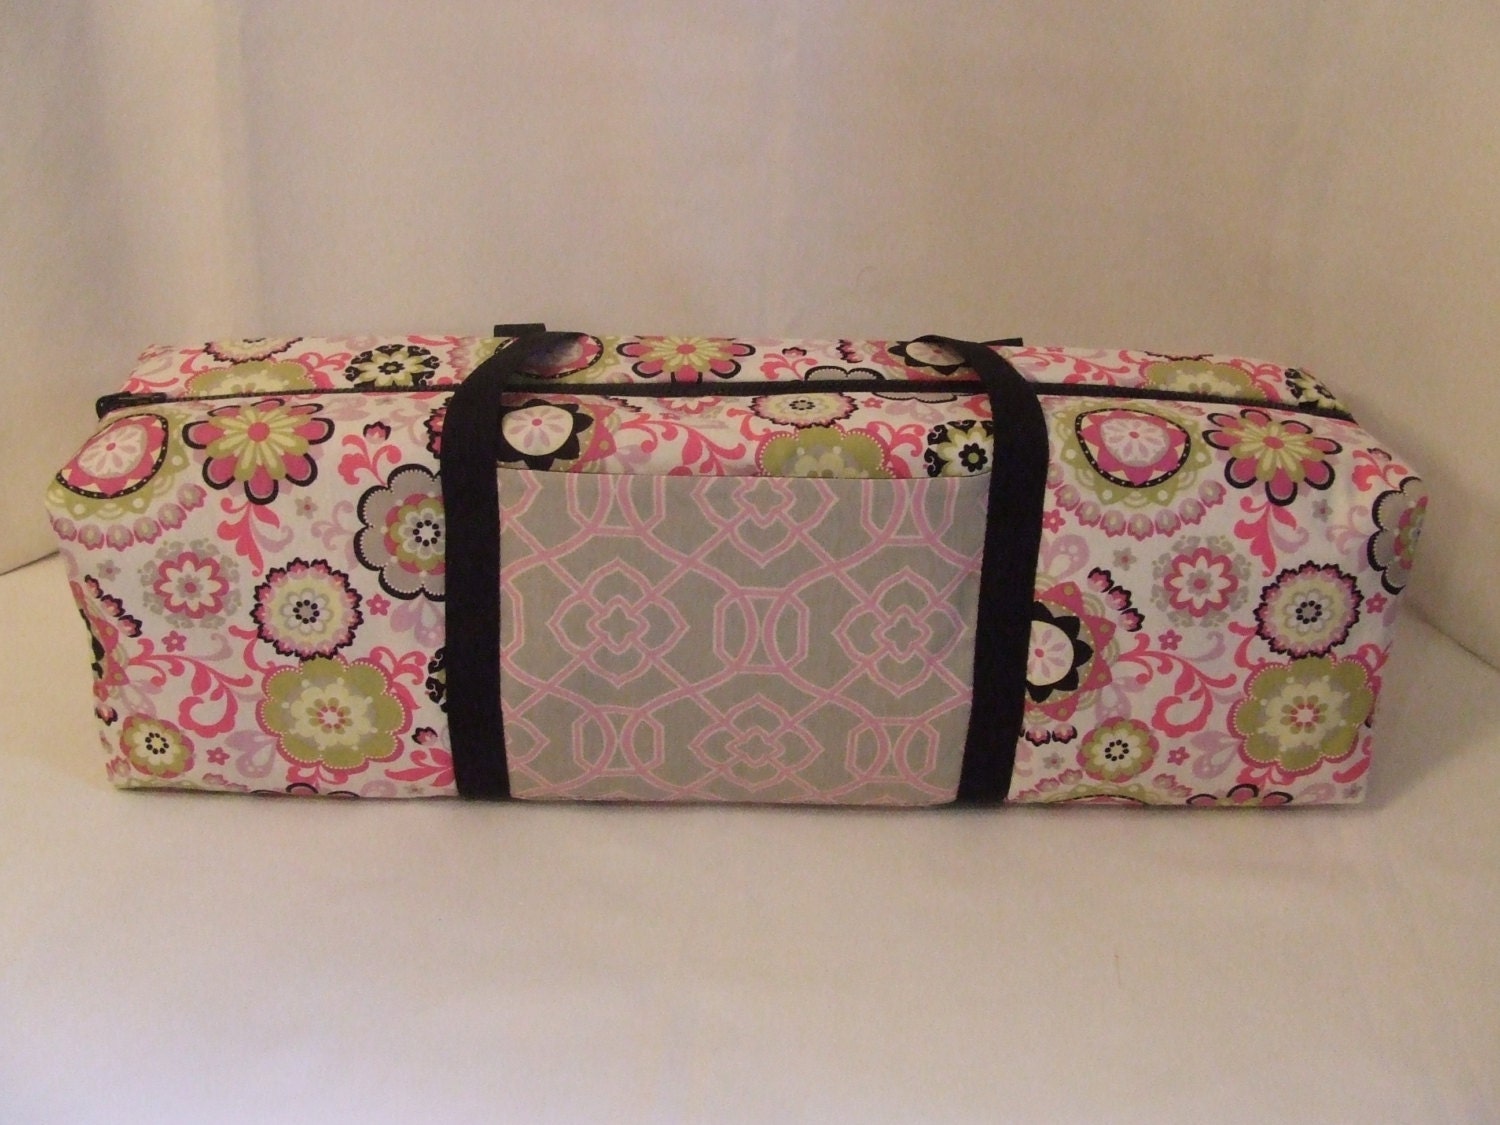 Carrying Case for the Silhouette by homespunexpressions on Etsy